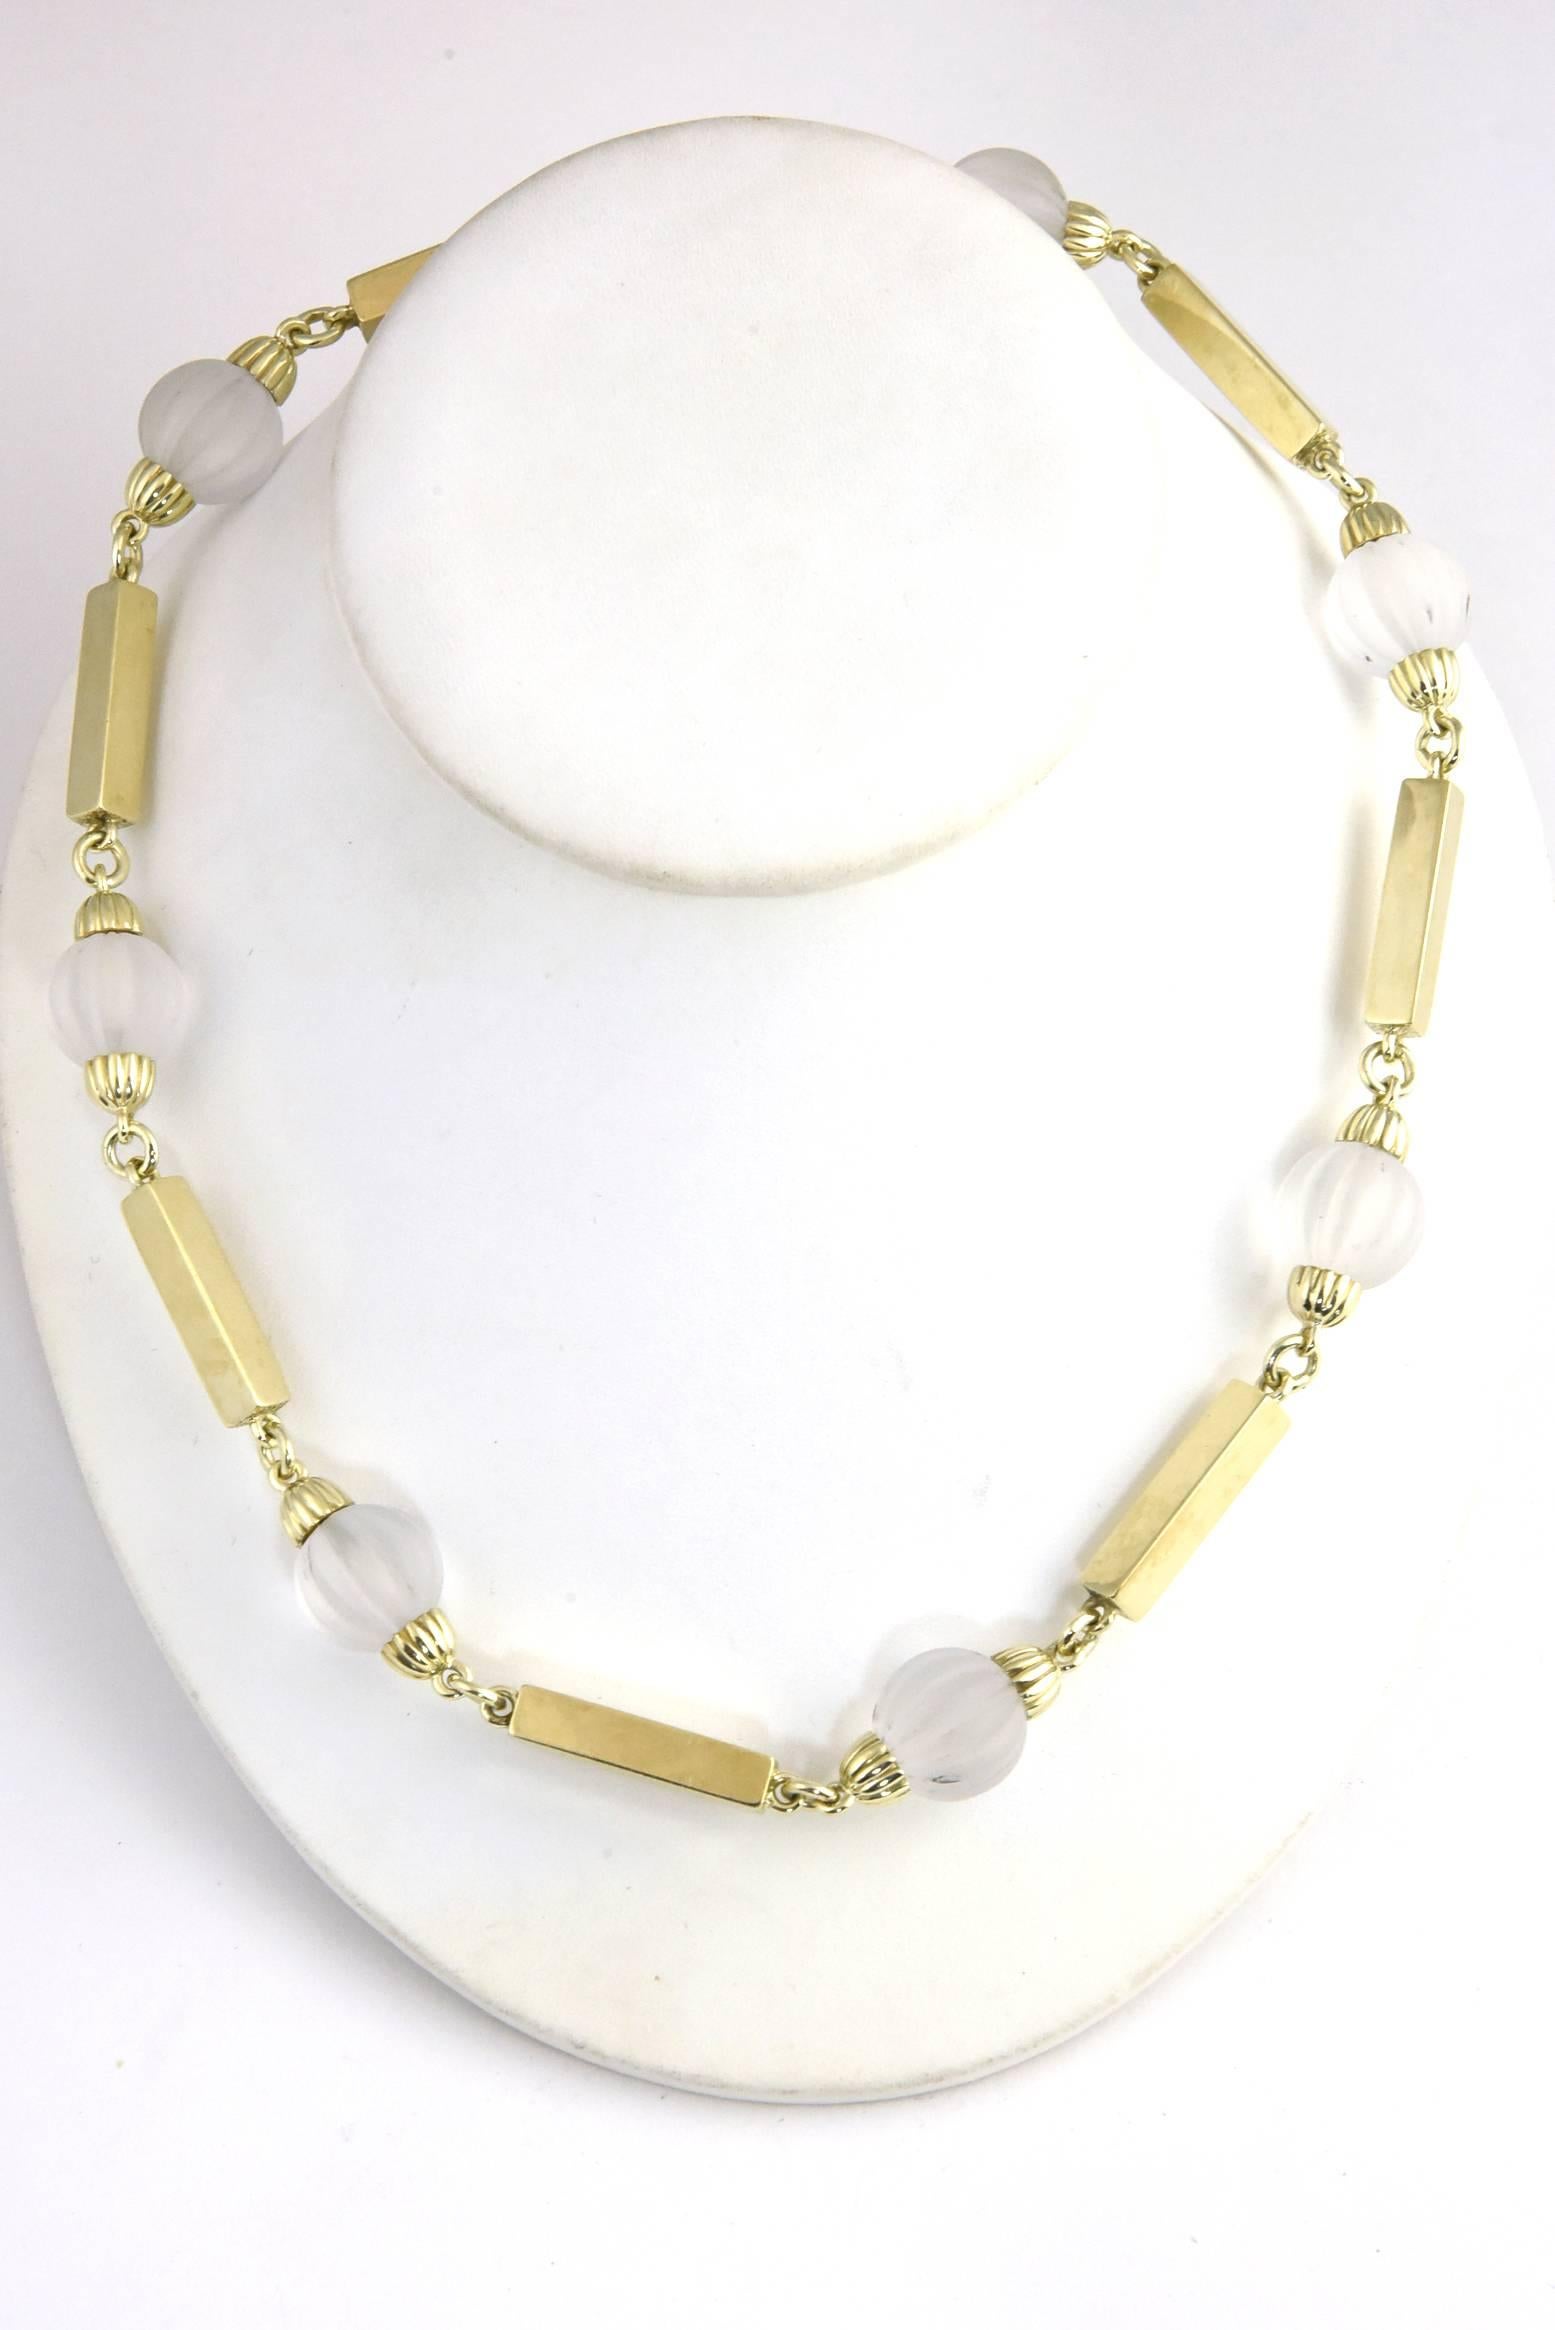 Women's 1970s La Triomphe Rock Crystal Fluted Beads and Gold Bar Necklace